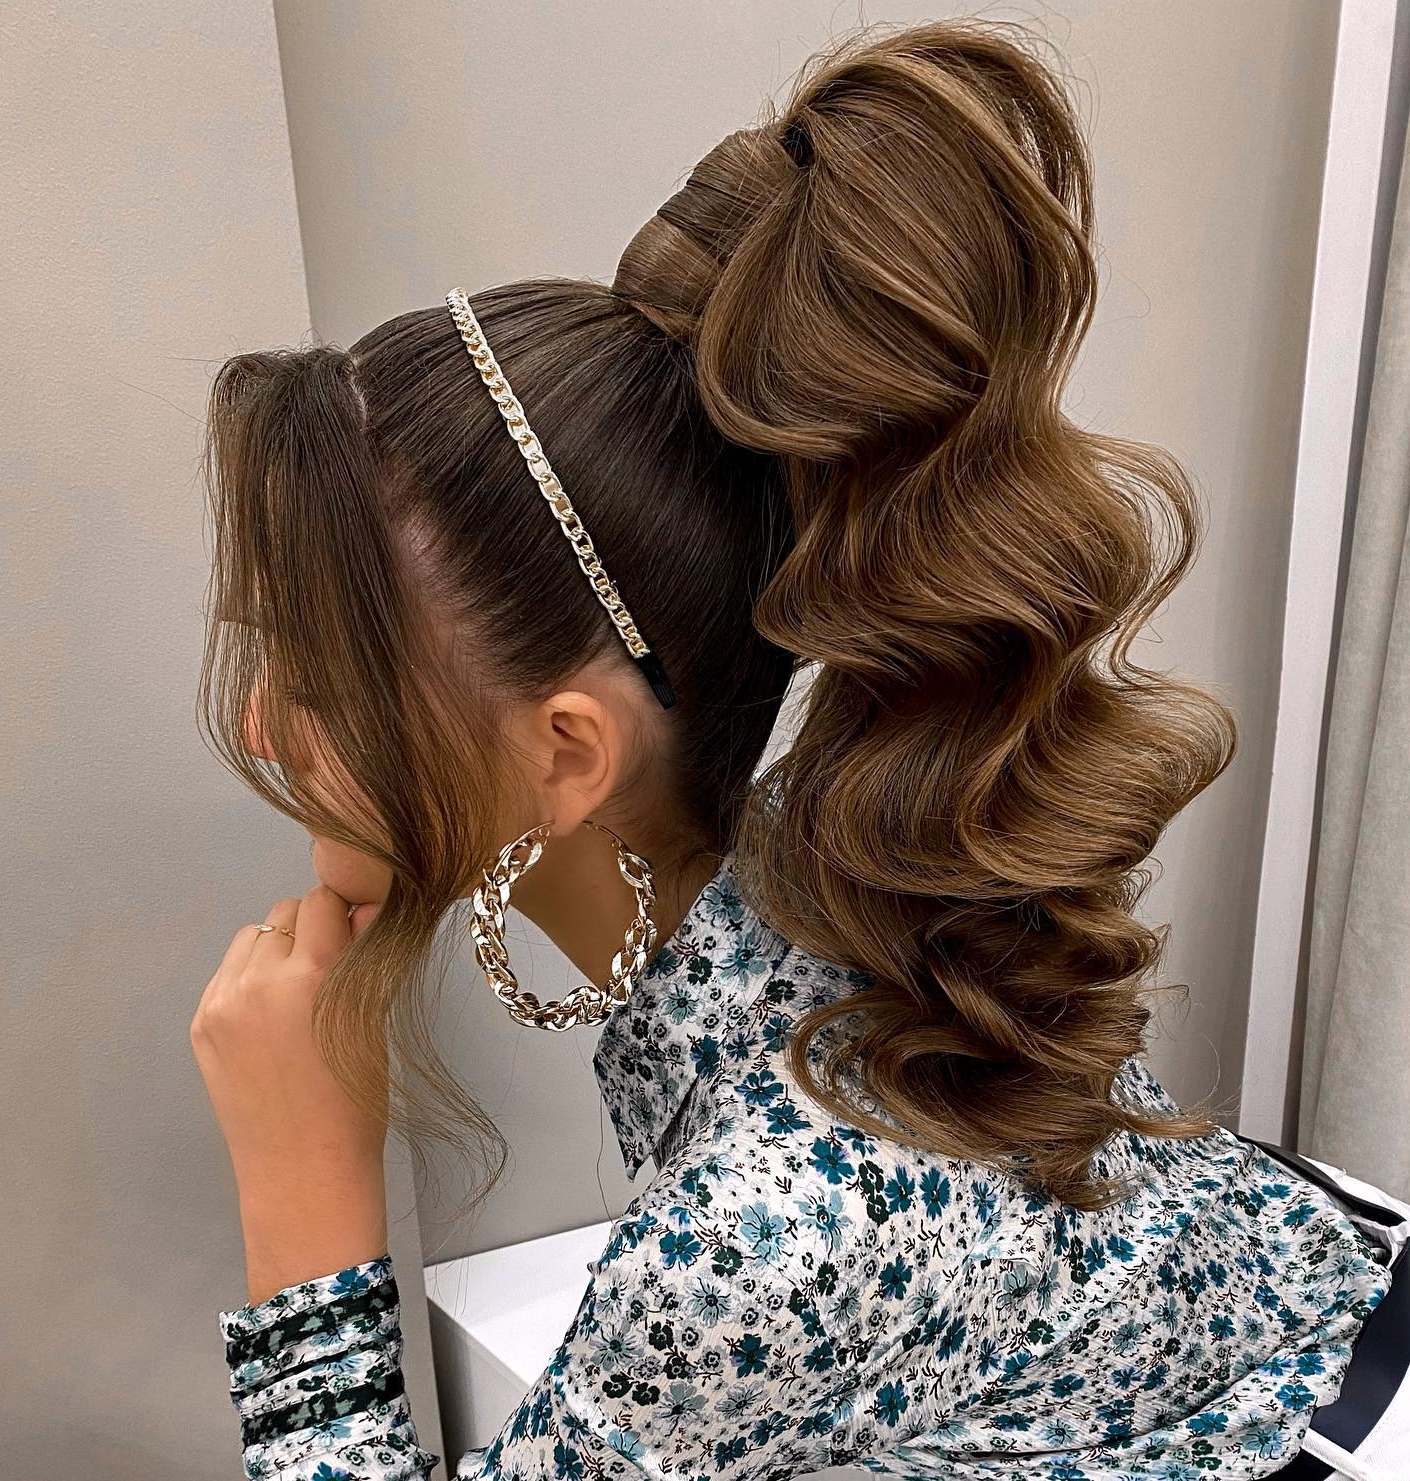 33 Trendy Ponytail Hairstyle Ideas for Long Hair